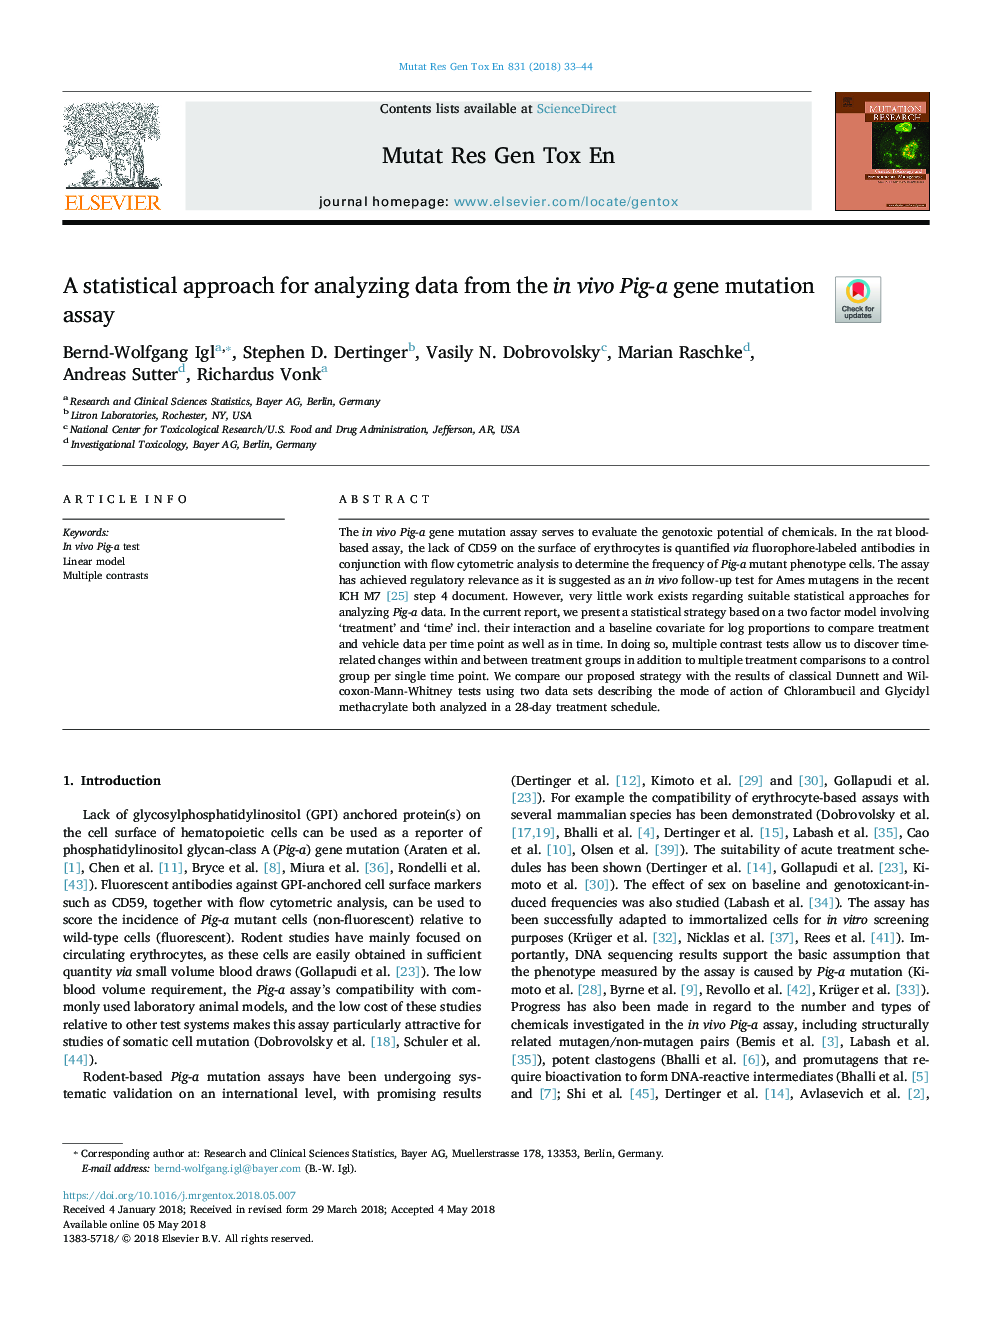 A statistical approach for analyzing data from the in vivo Pig-a gene mutation assay